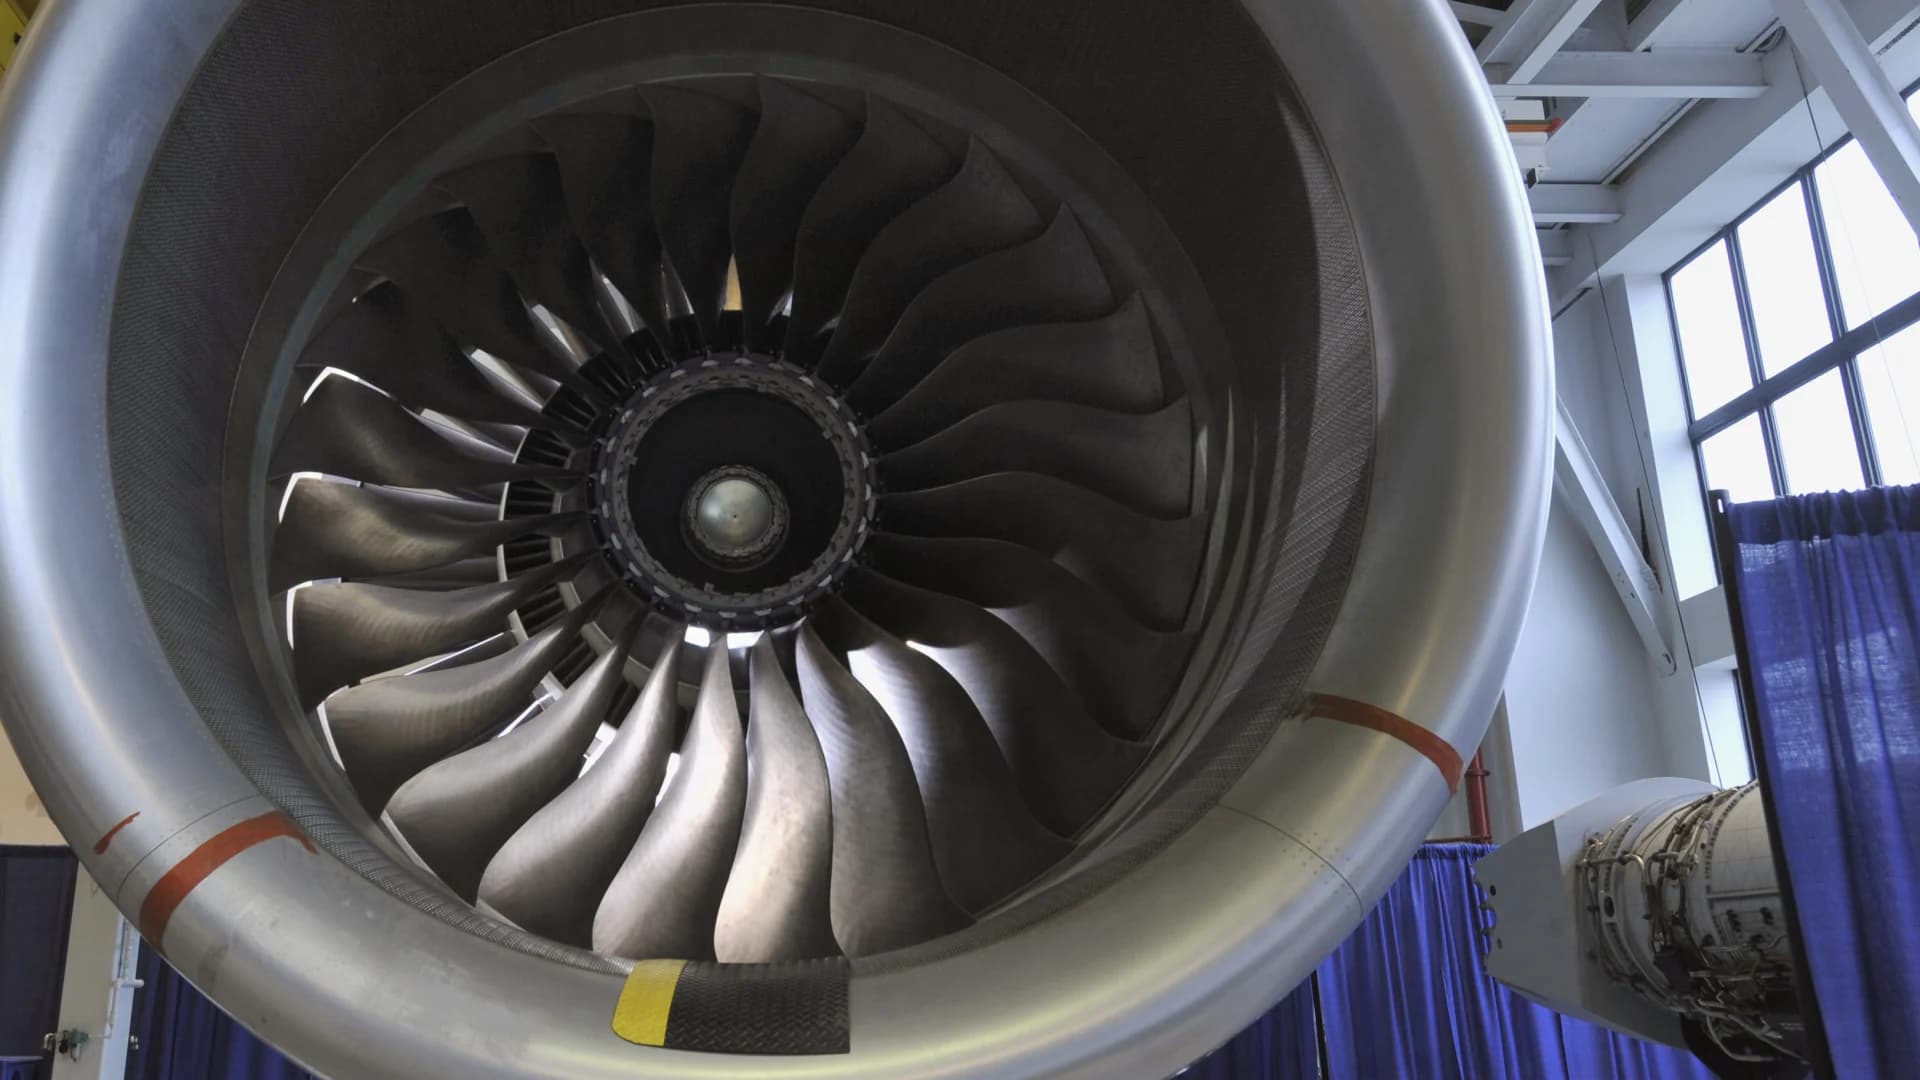 New Pratt & Whitney contract boasts higher wages, better job security for workers  